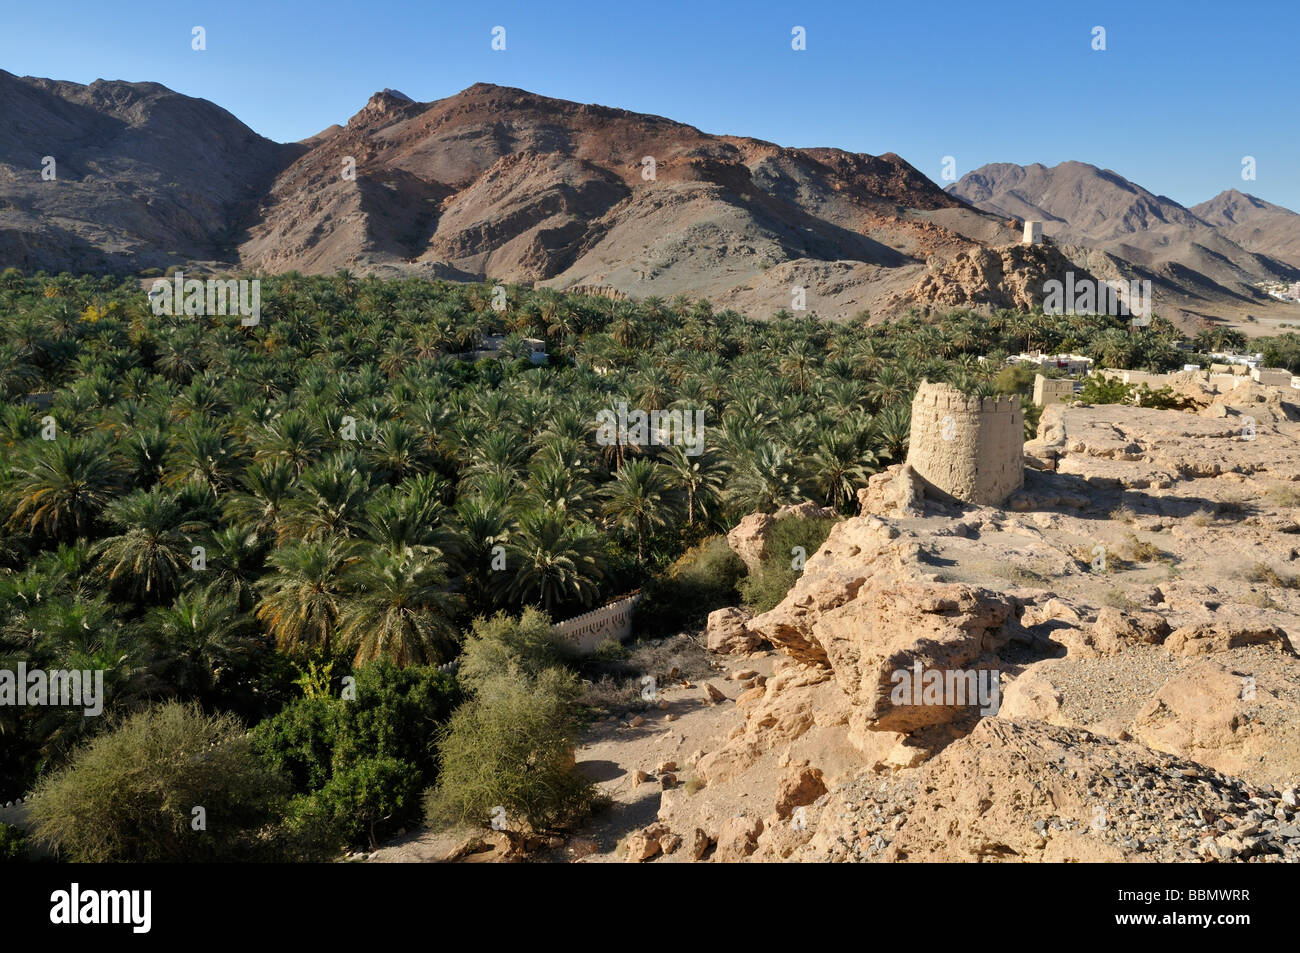 View over Franja palm oasis, Batinah Region, Sultanate of Oman, Arabia, Middle East Stock Photo